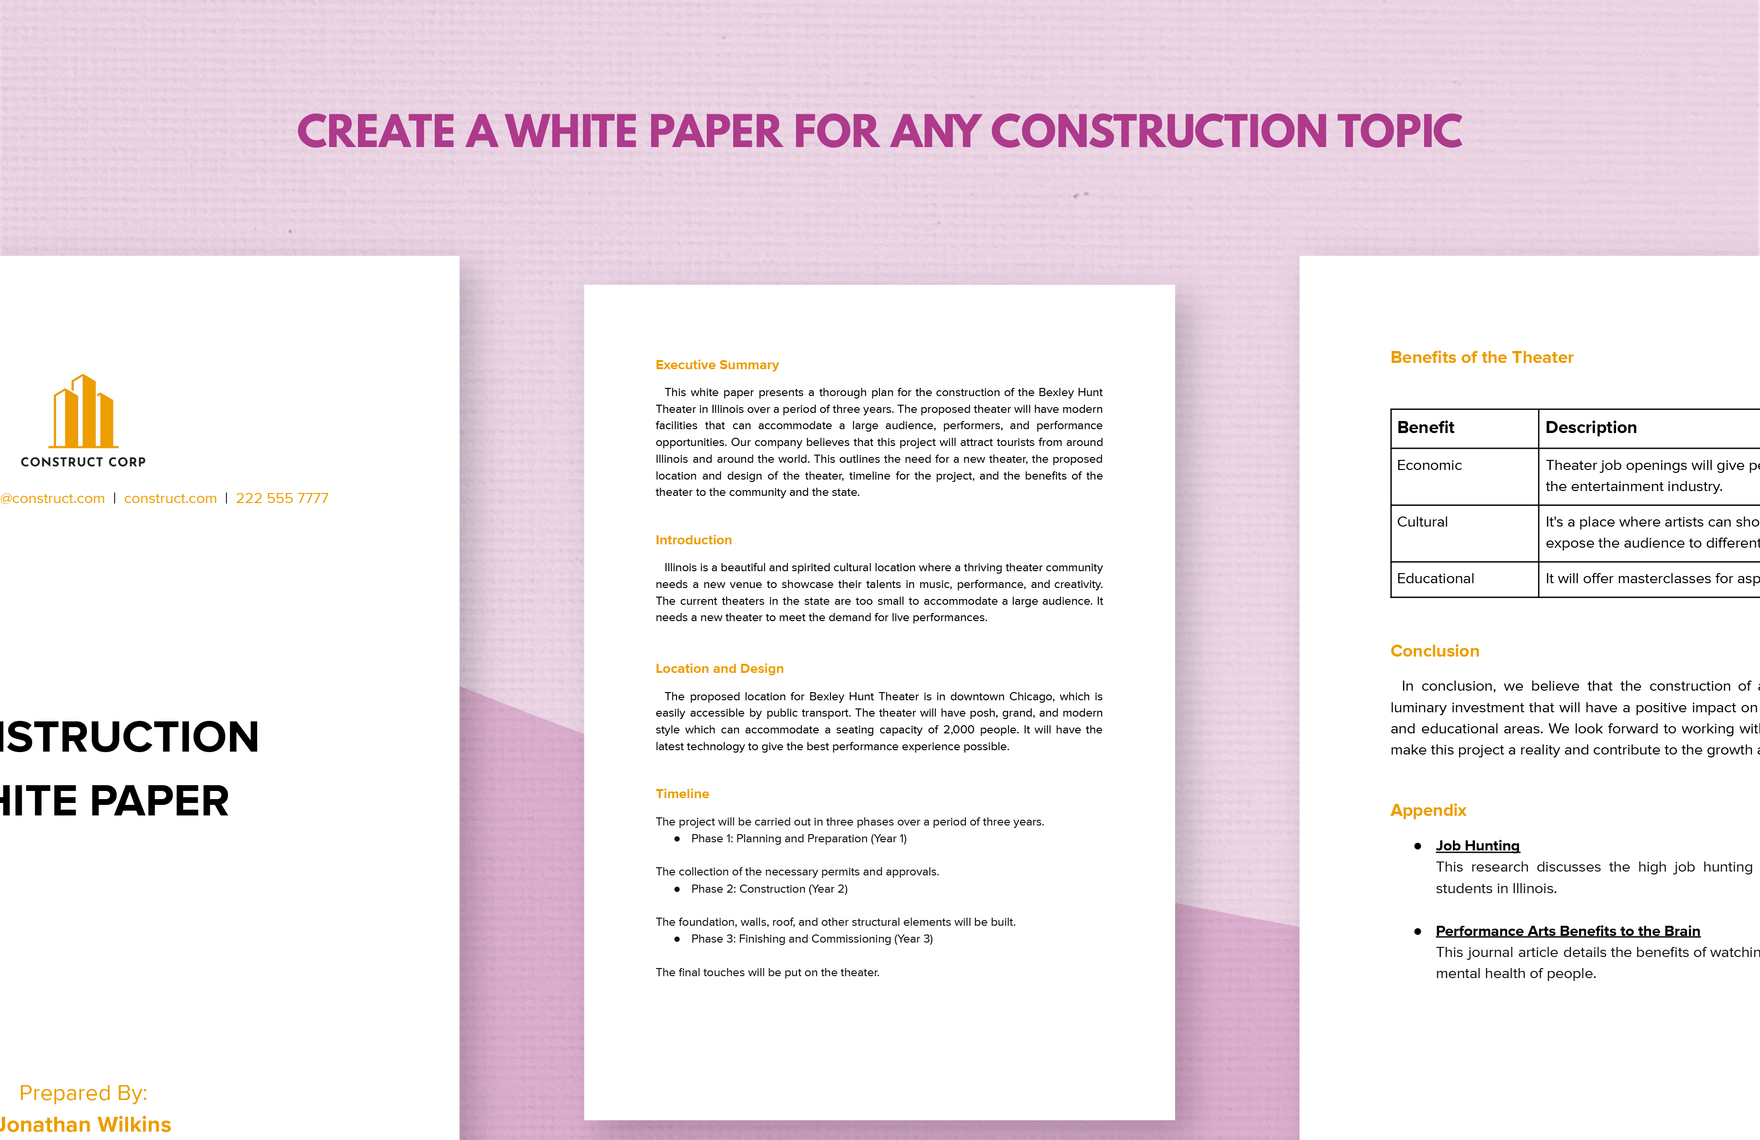 Construction White Papers